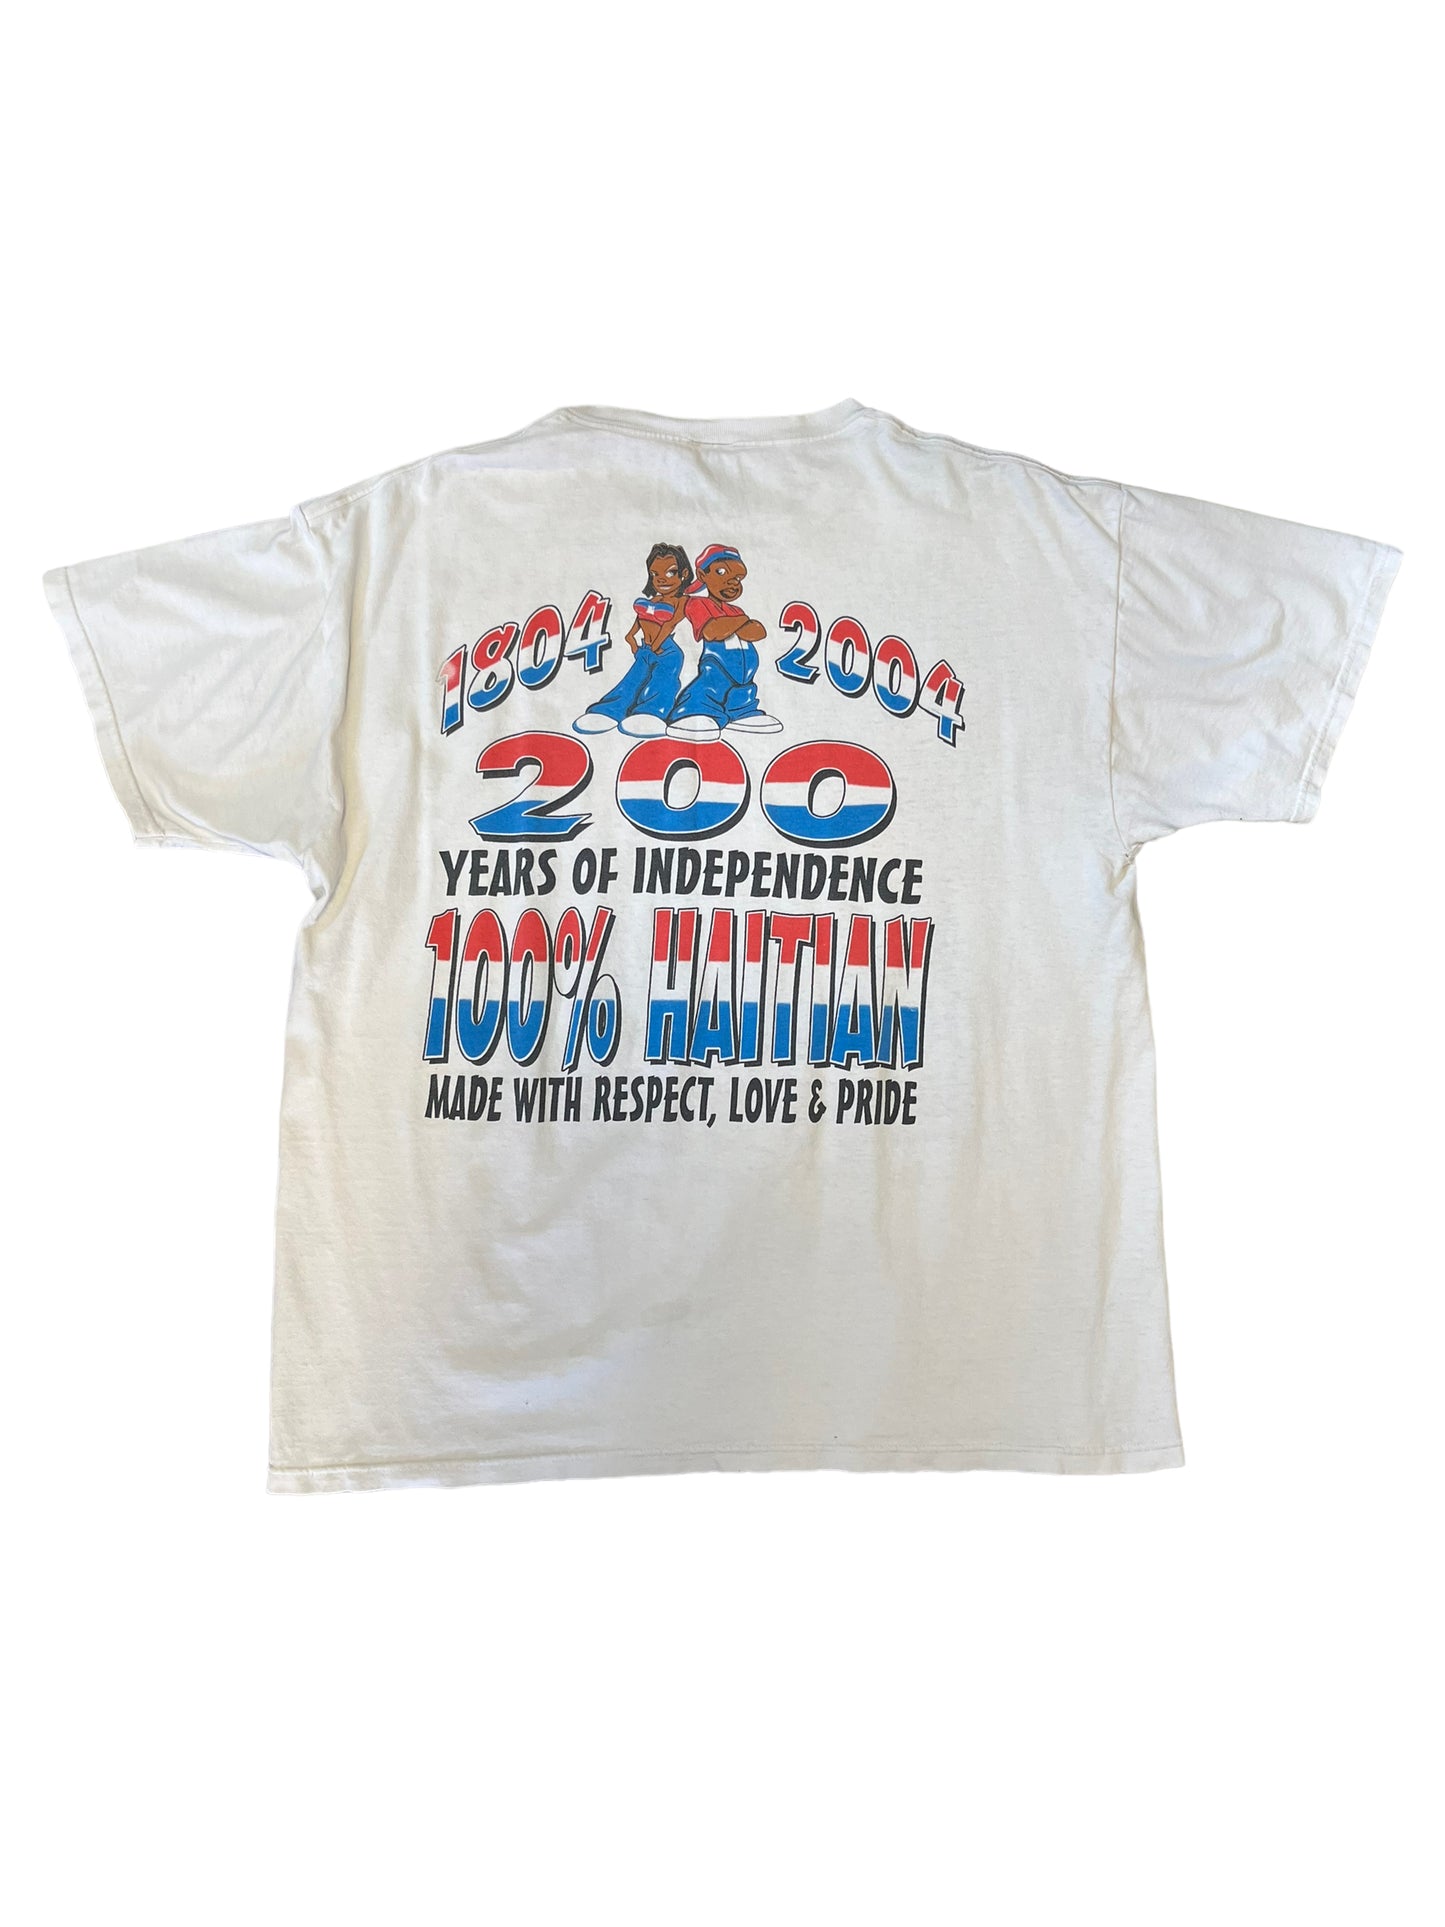 (XL) 2004 Haitian Independence of 200 Years Double Sided Tee